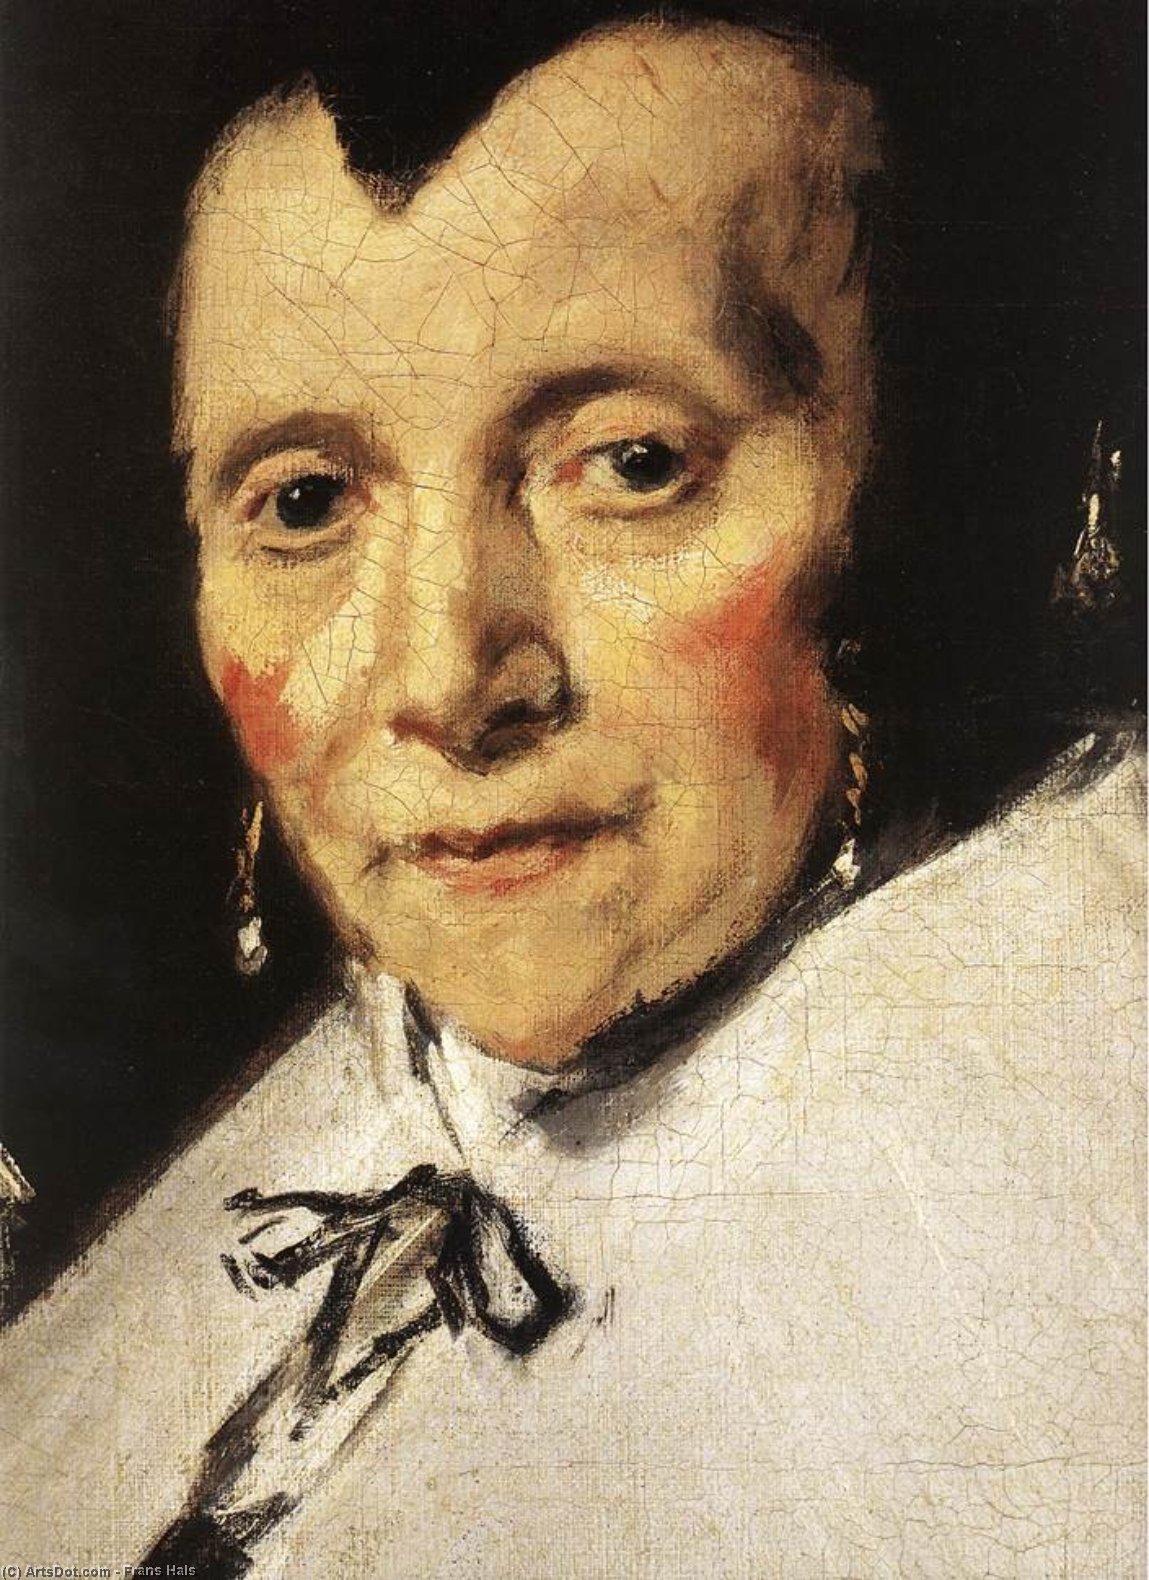 Wikioo.org - The Encyclopedia of Fine Arts - Painting, Artwork by Frans Hals - Regentesses of the Old Men's Almshouse (detail)